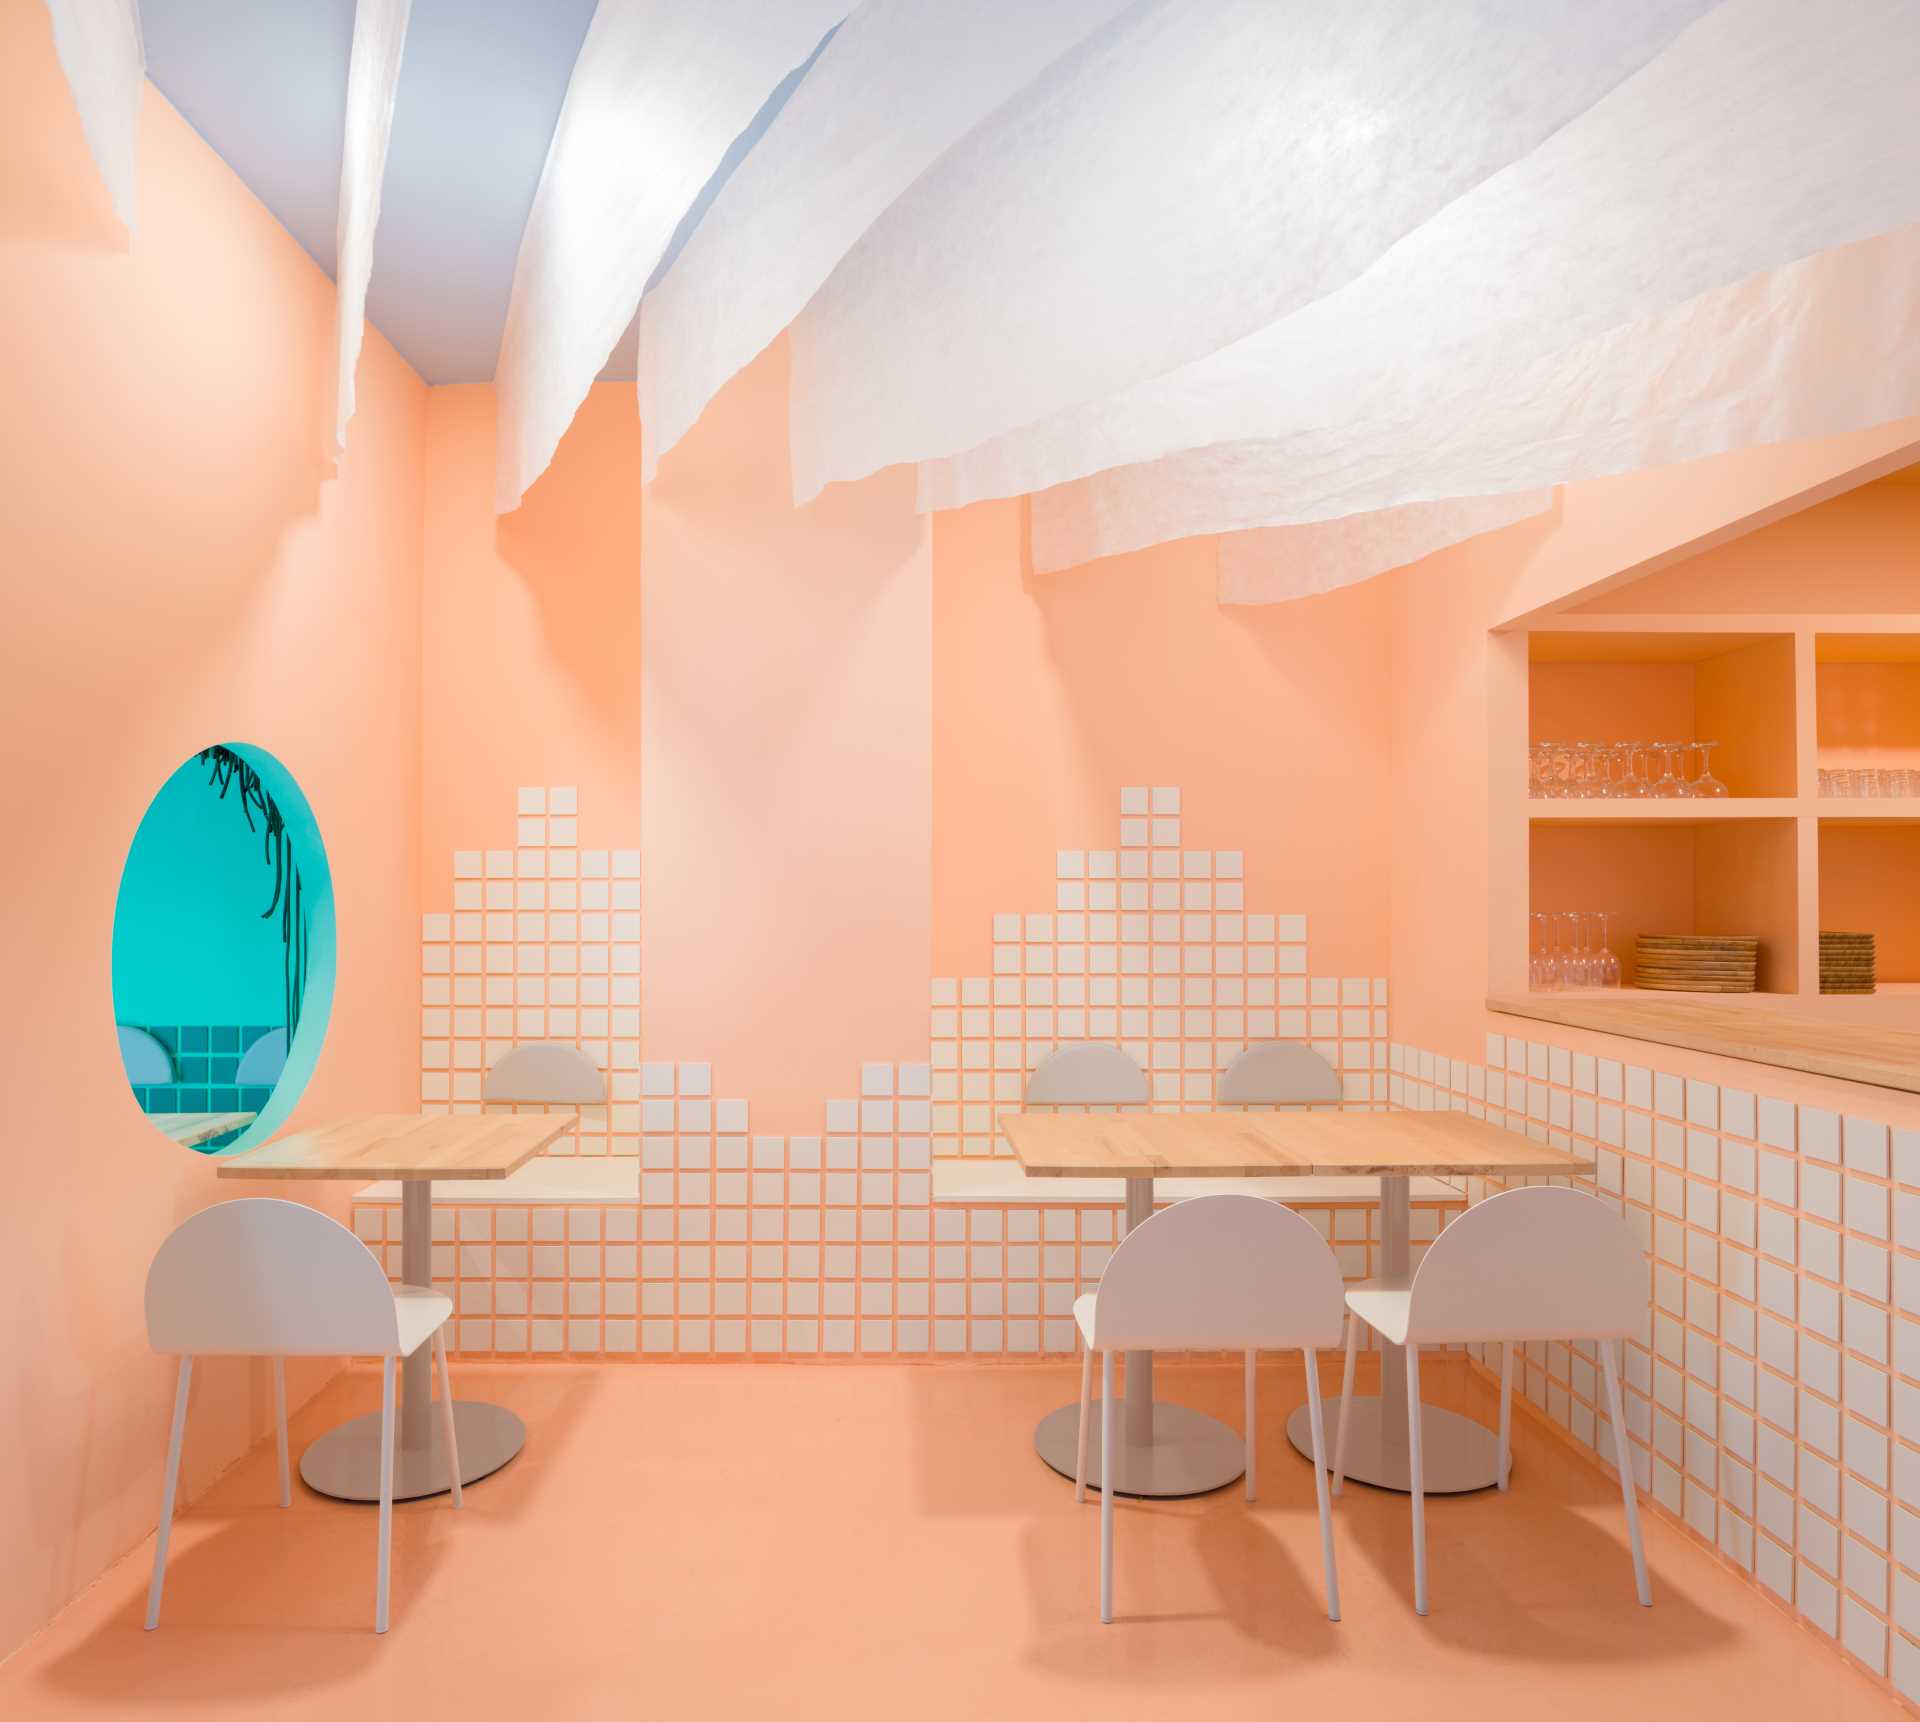 A modern restaurant with sandy colored walls and a ceiling that recreates a blanket of clouds.